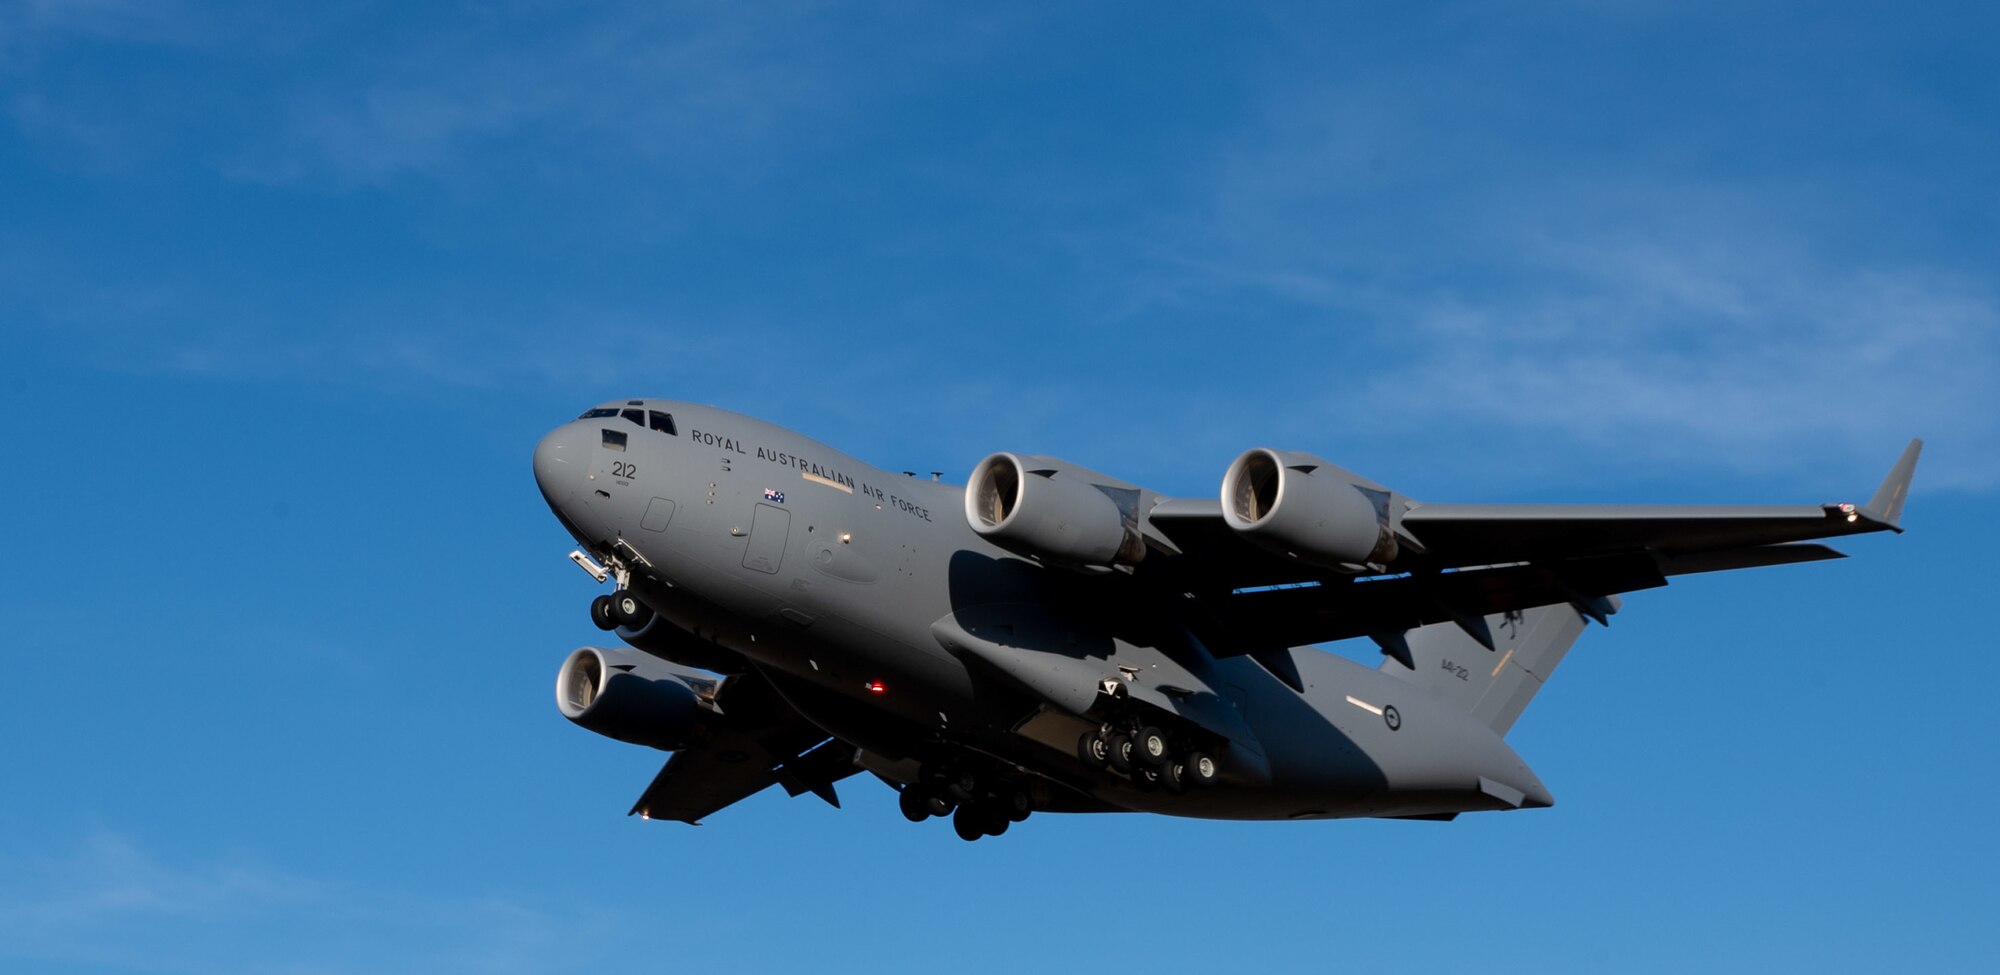 A Royal Australian Air Force C-17 Globemaster III prepares to land at Dover Air Force Base, Del., March 13, 2021. The U.S. and Australia maintain a robust relationship underpinned by shared democratic values, common interests and cultural bonds. The U.S.–Australia alliance is an anchor for peace and stability in the Indo-Pacific region and around the world.